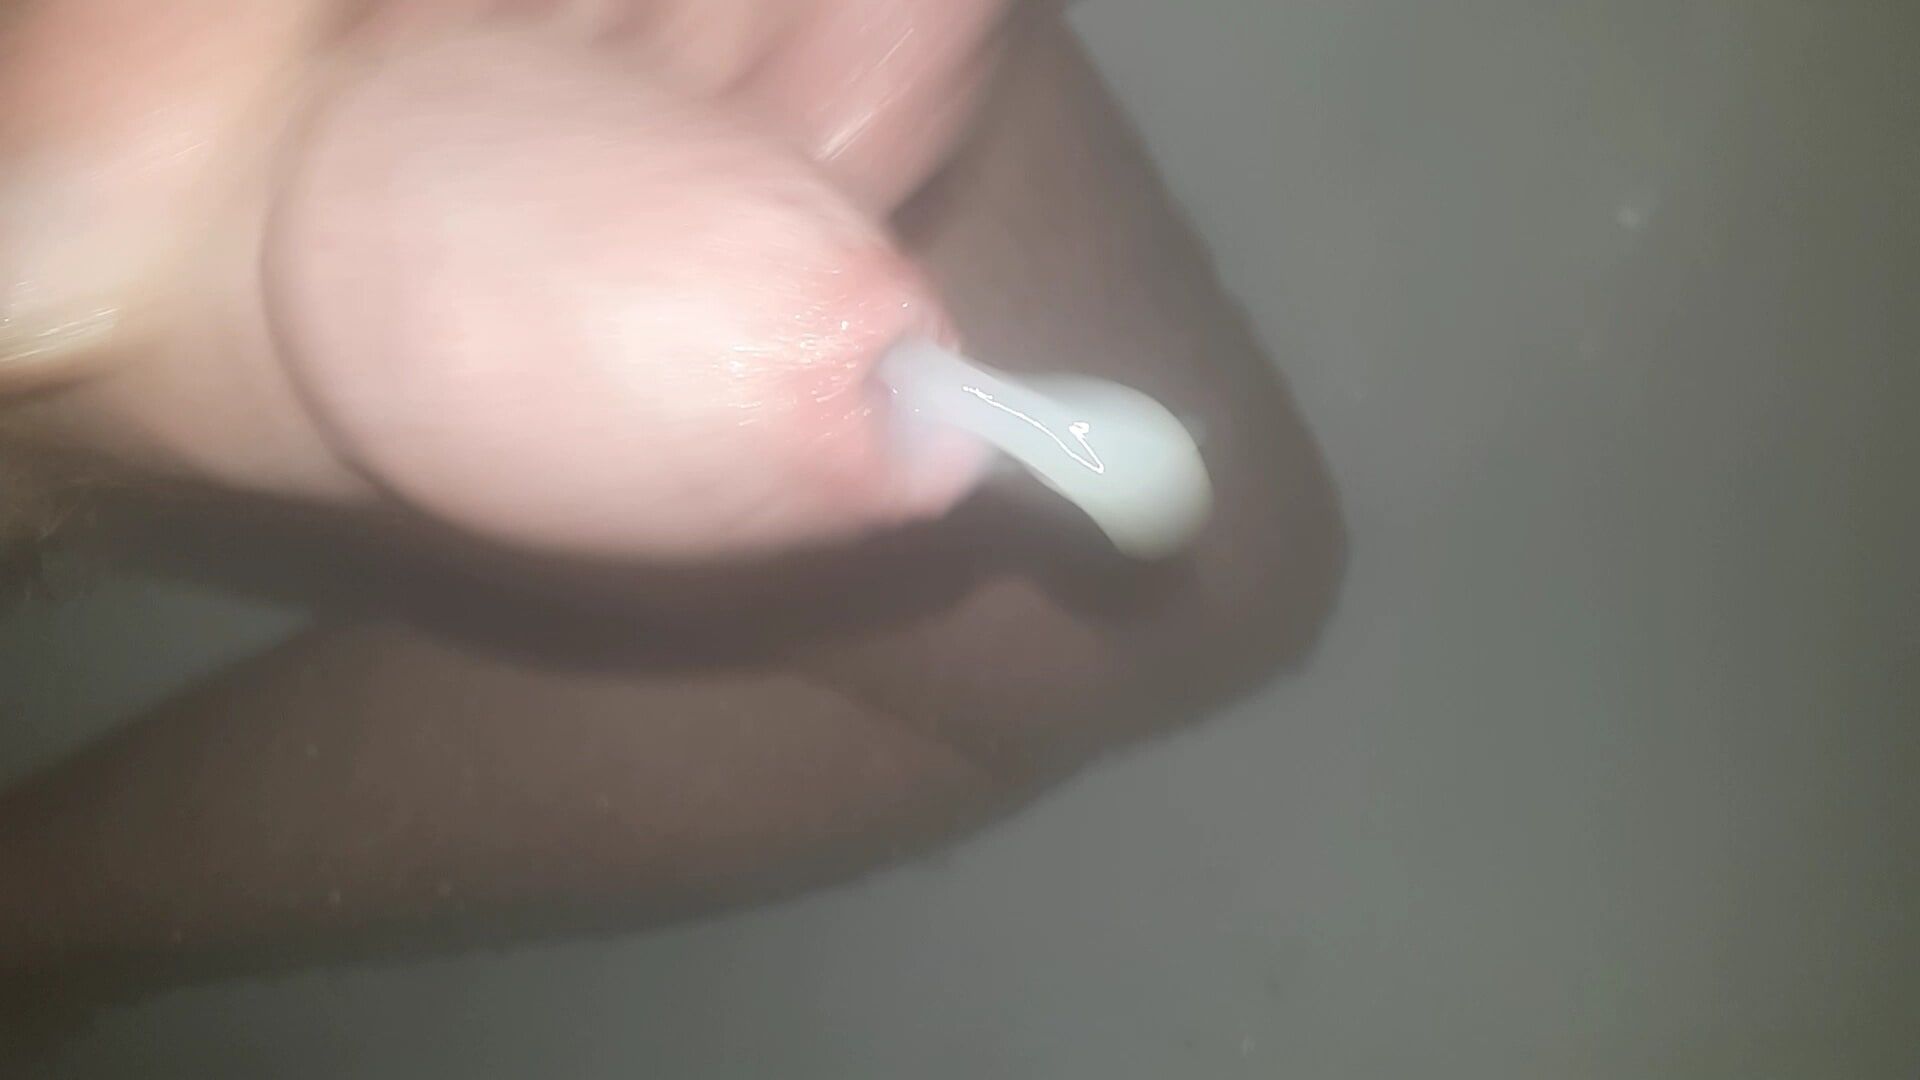 my uncut cock shooting its load #3